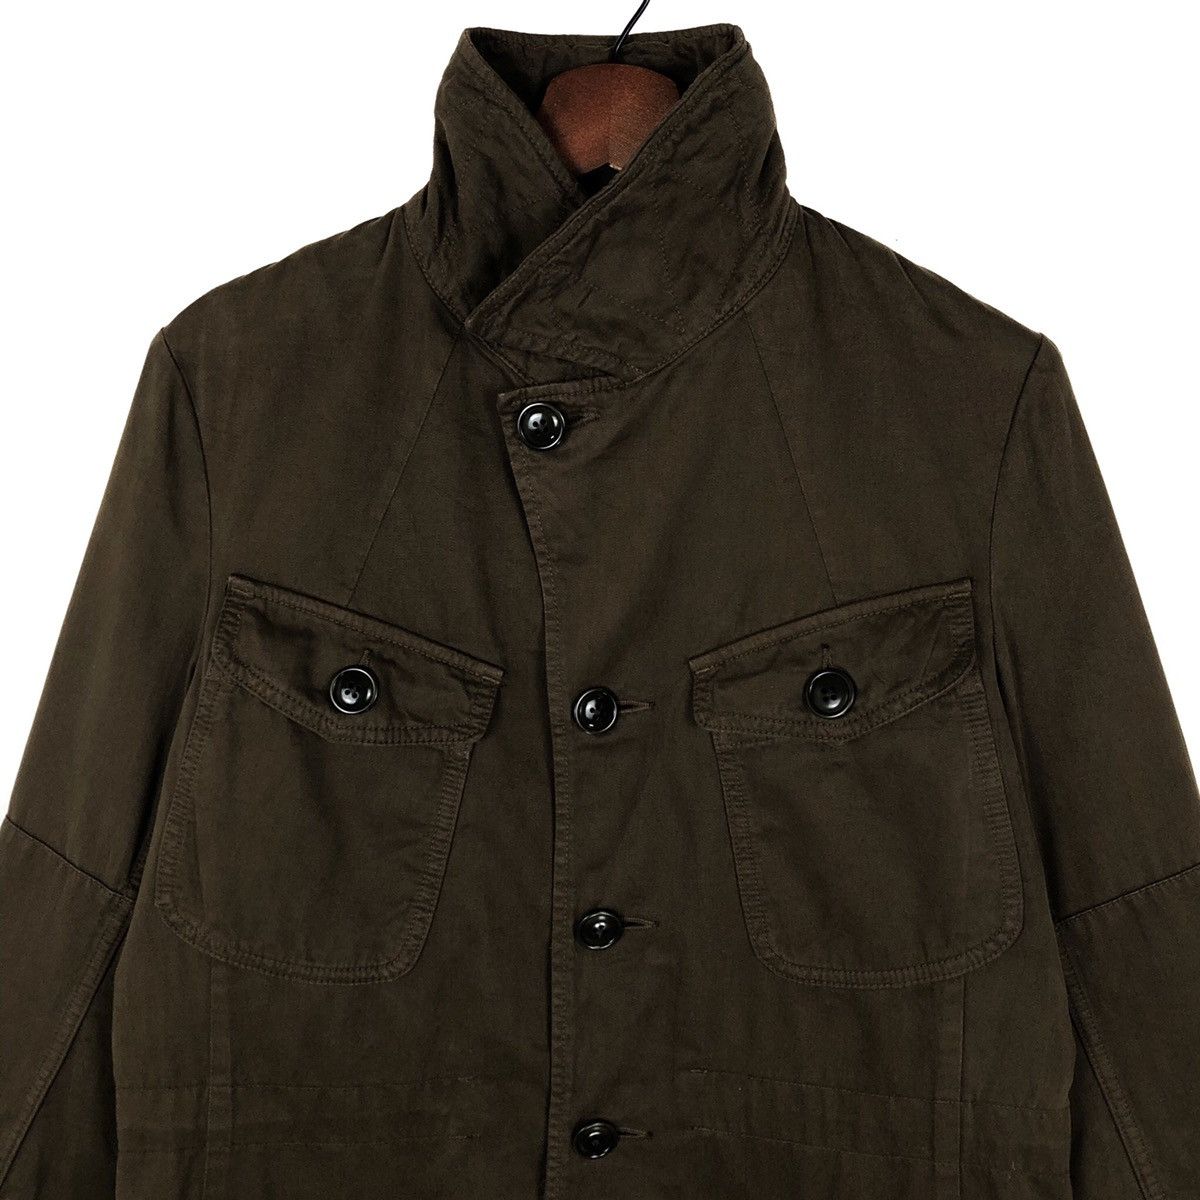 M65 Military Jacket By 45rpm Studio - 3